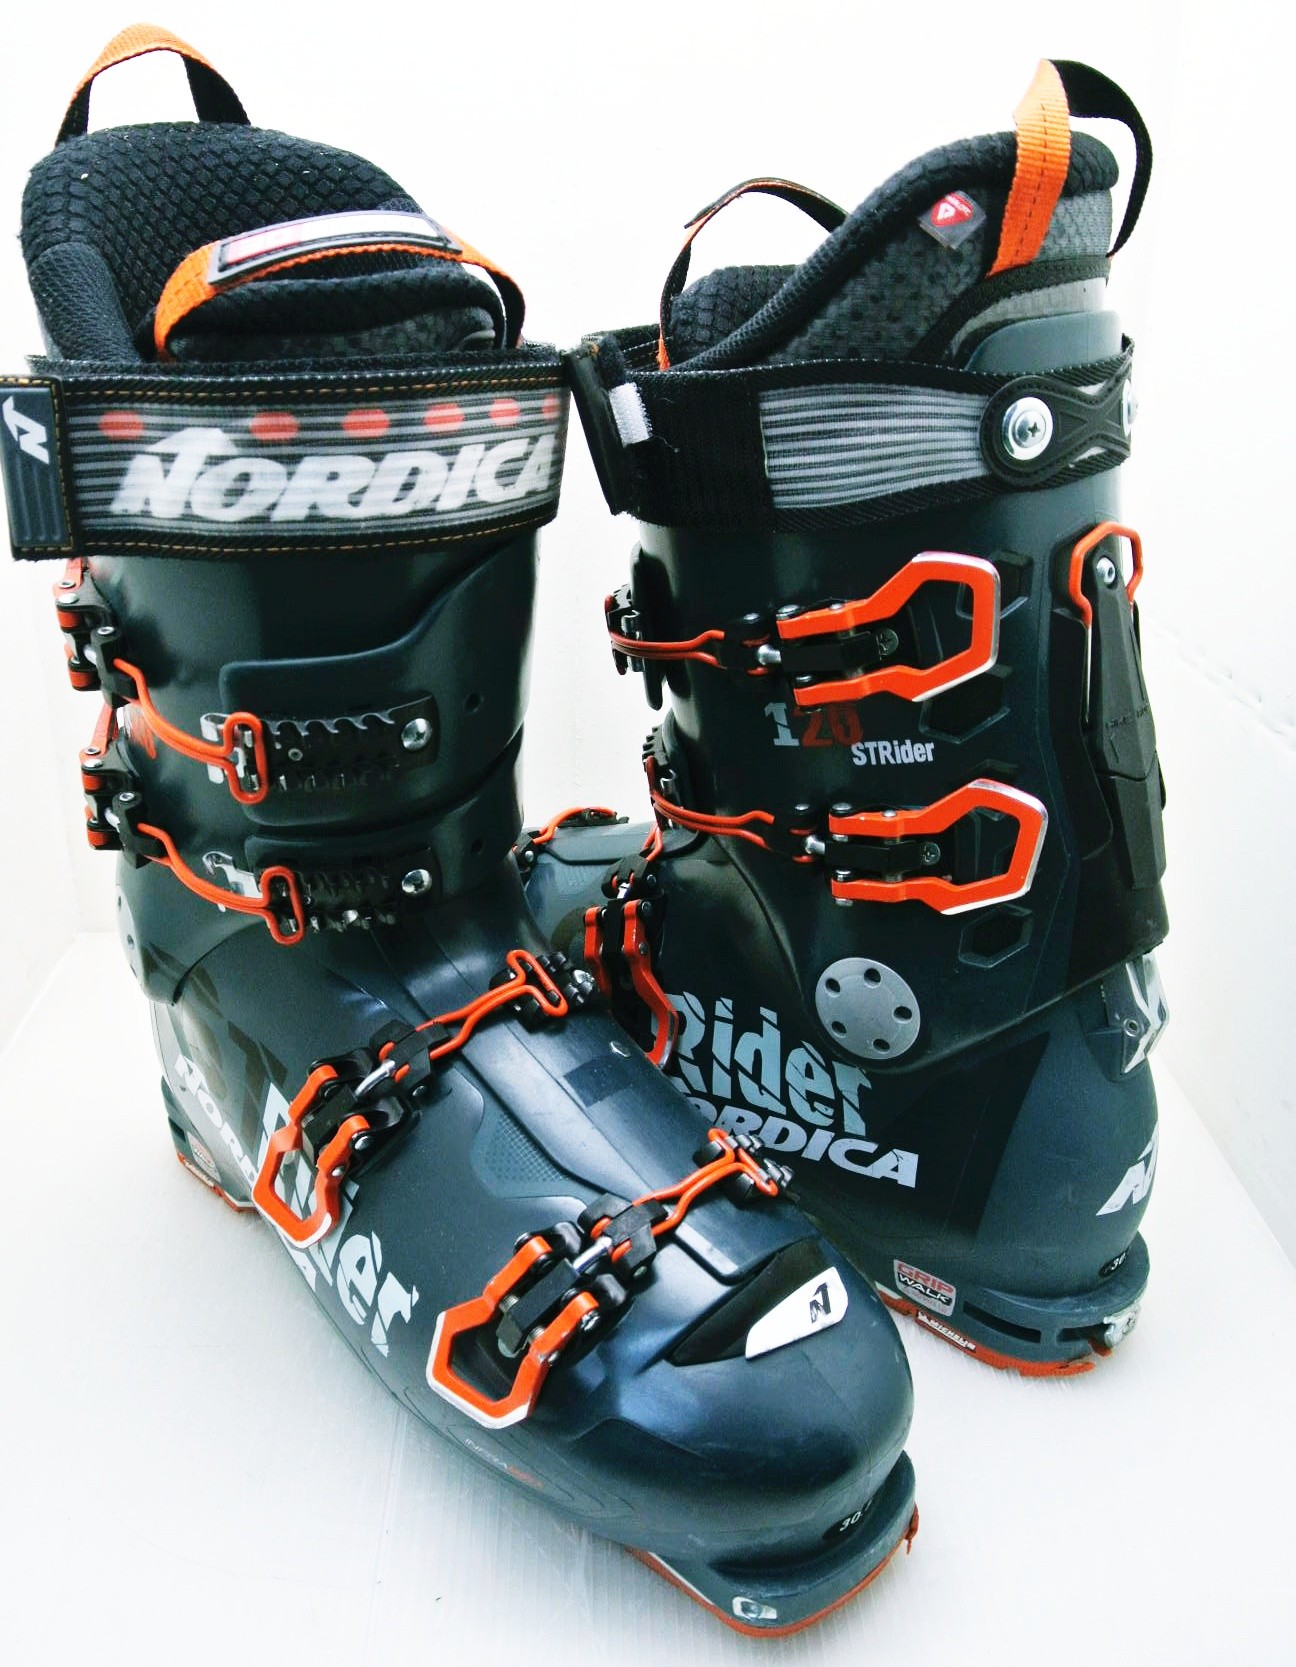 Touring / Mountaineering - NORDICA STRIDER 120 DYN - 30,5cm, UK 11,5